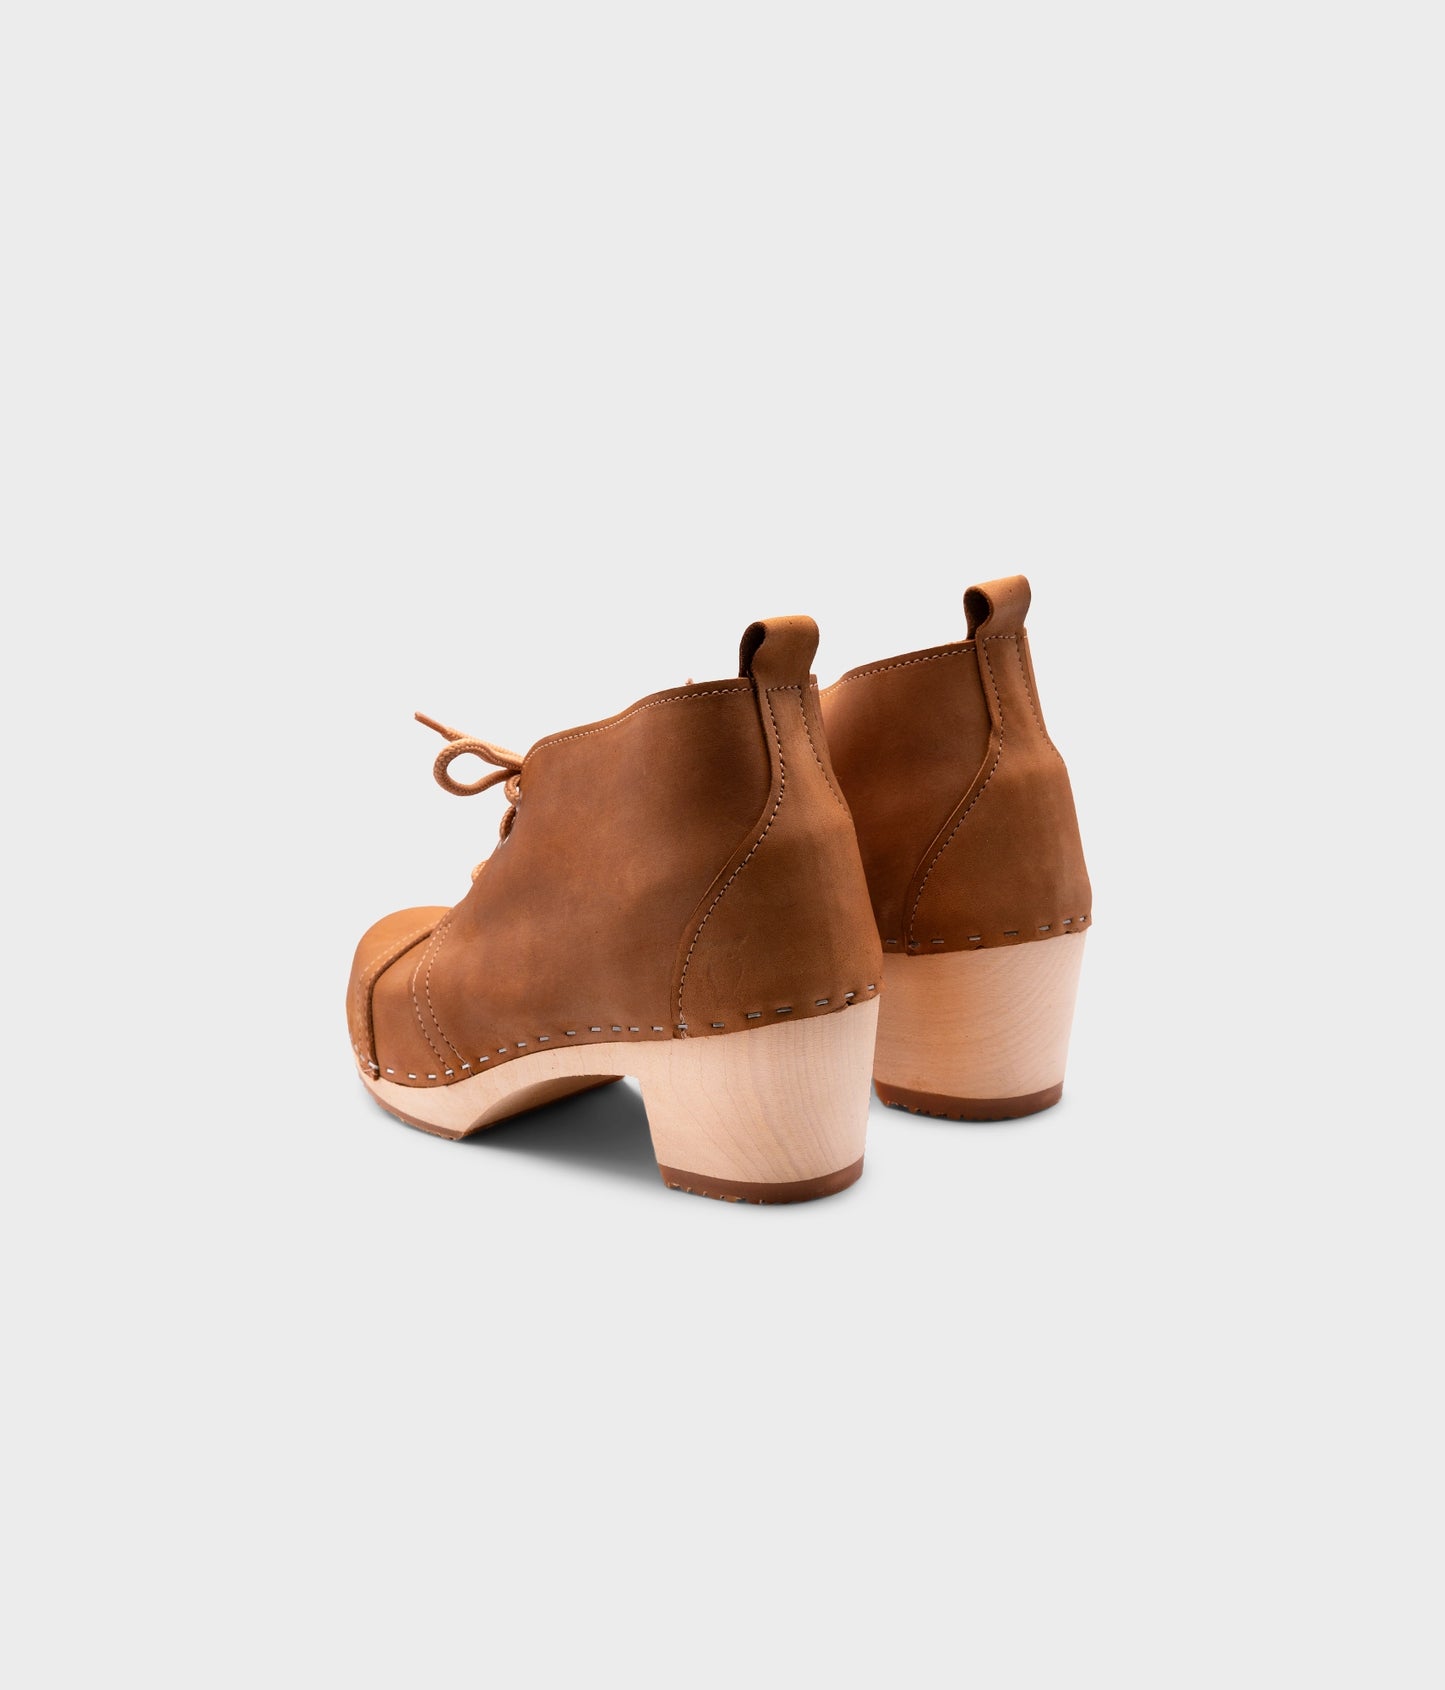 high heeled chukka clog boots in light brown nubuck leather stapled on a light wooden base with beige laces